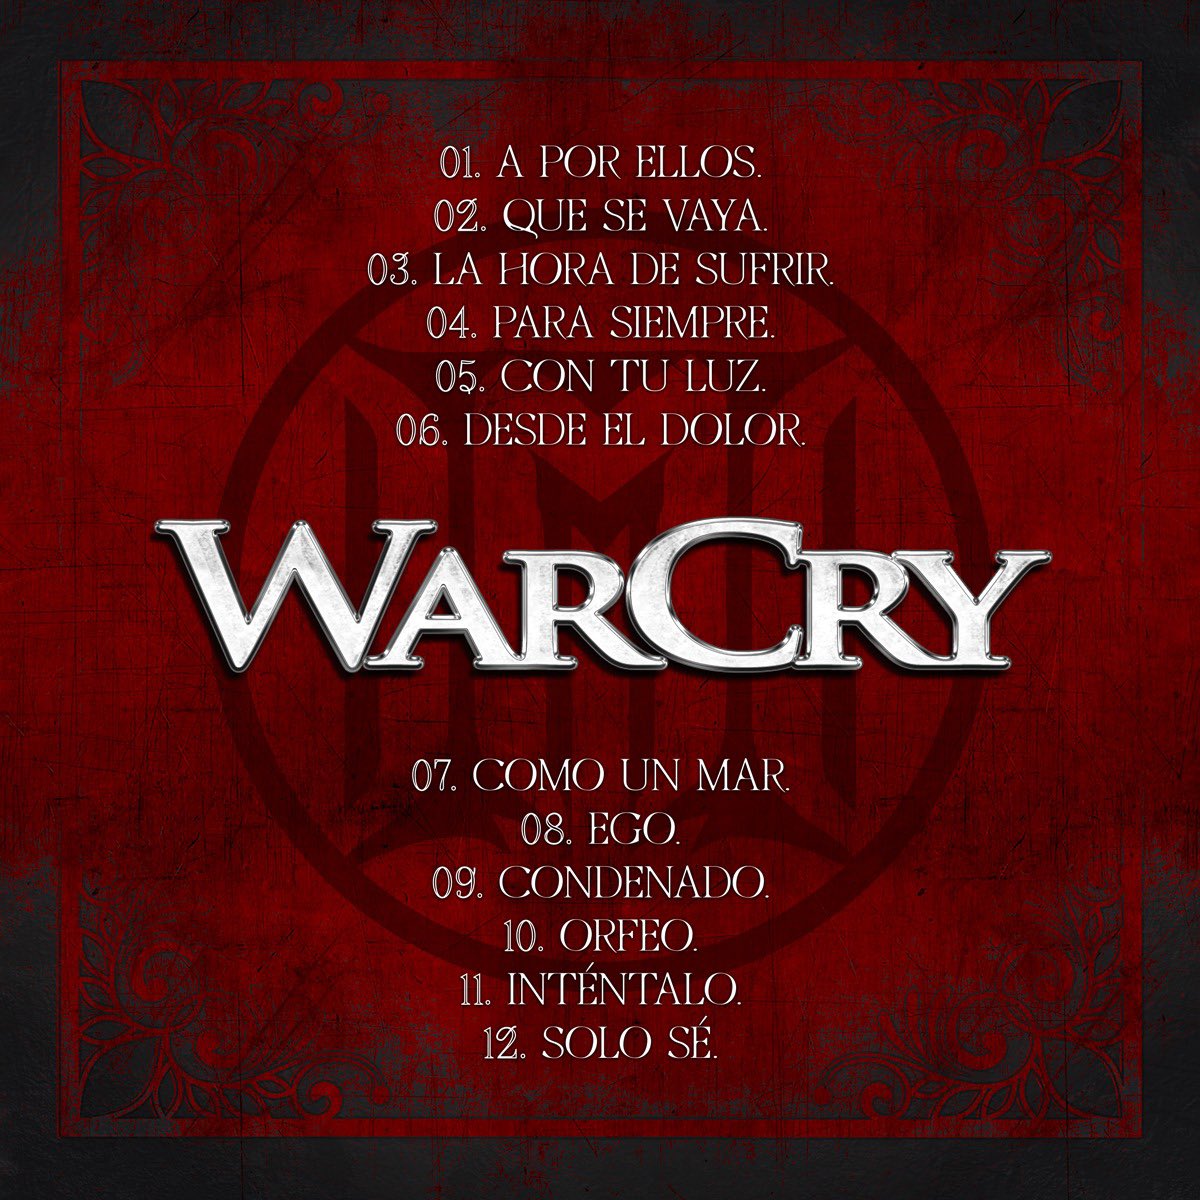 WarCry Oficial (@WarCryOficial) / Twitter